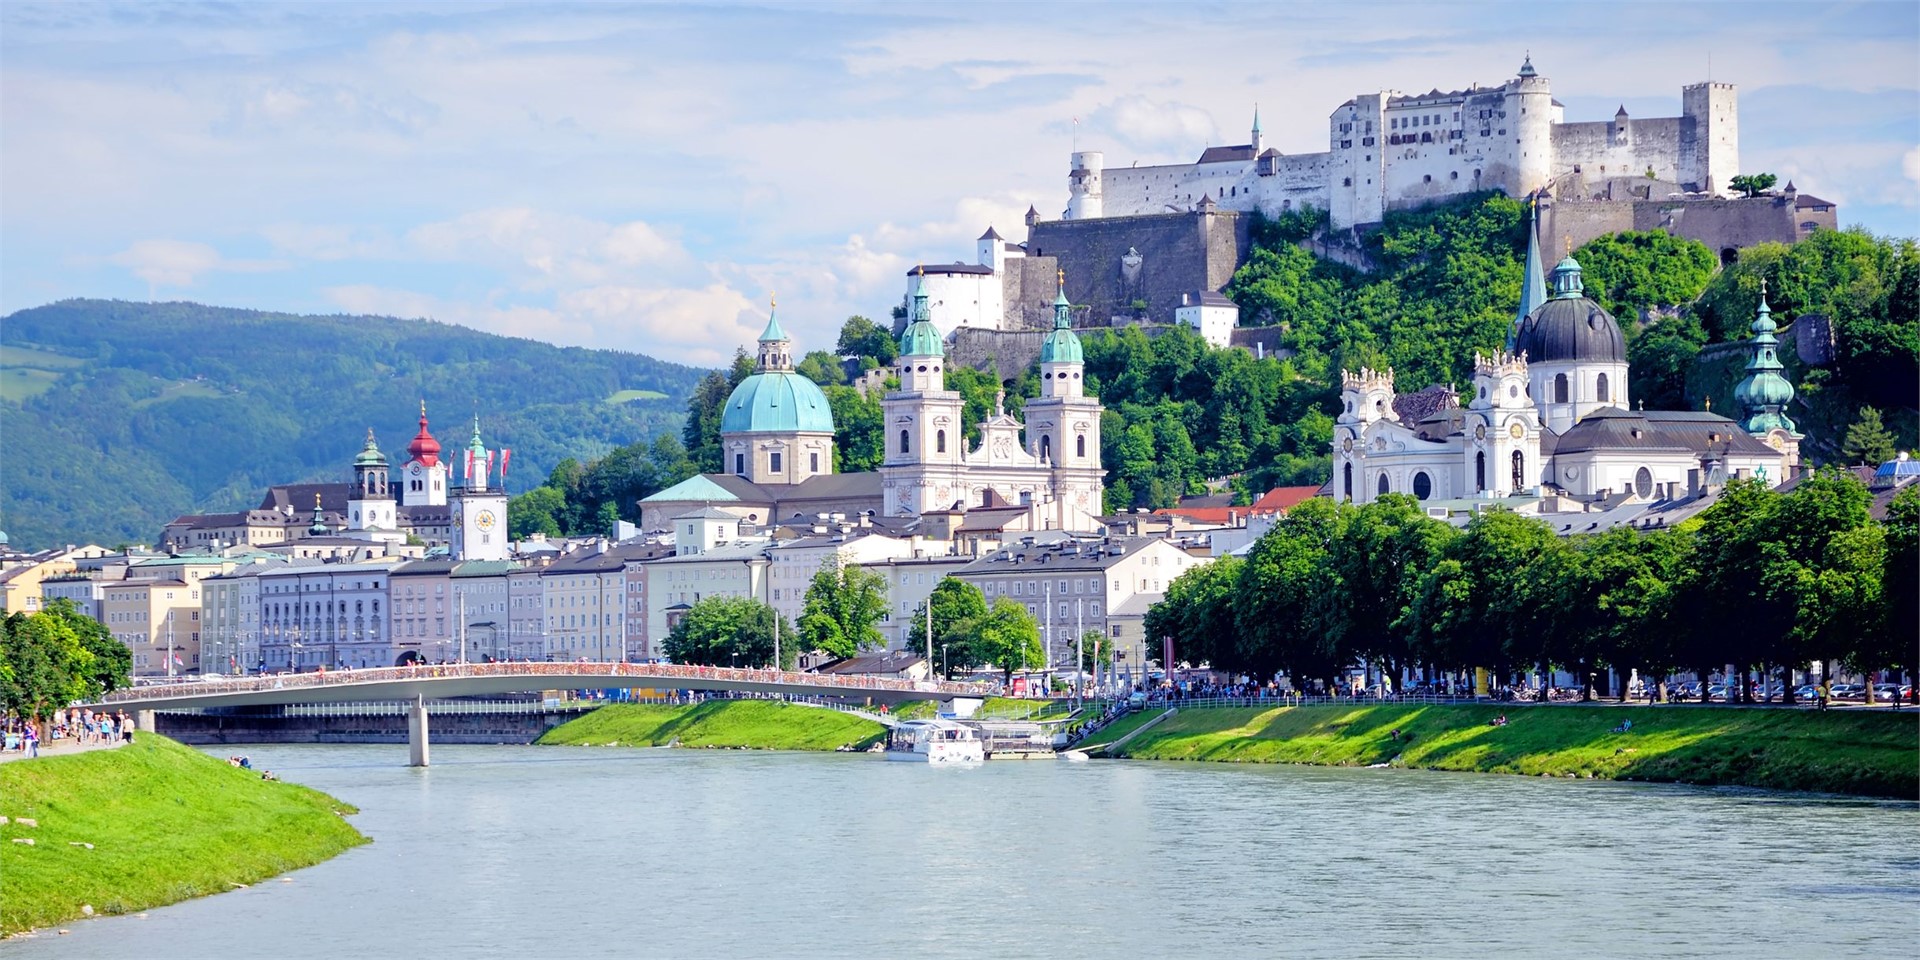 Hotels and accommodation in Salzburg, Austria
